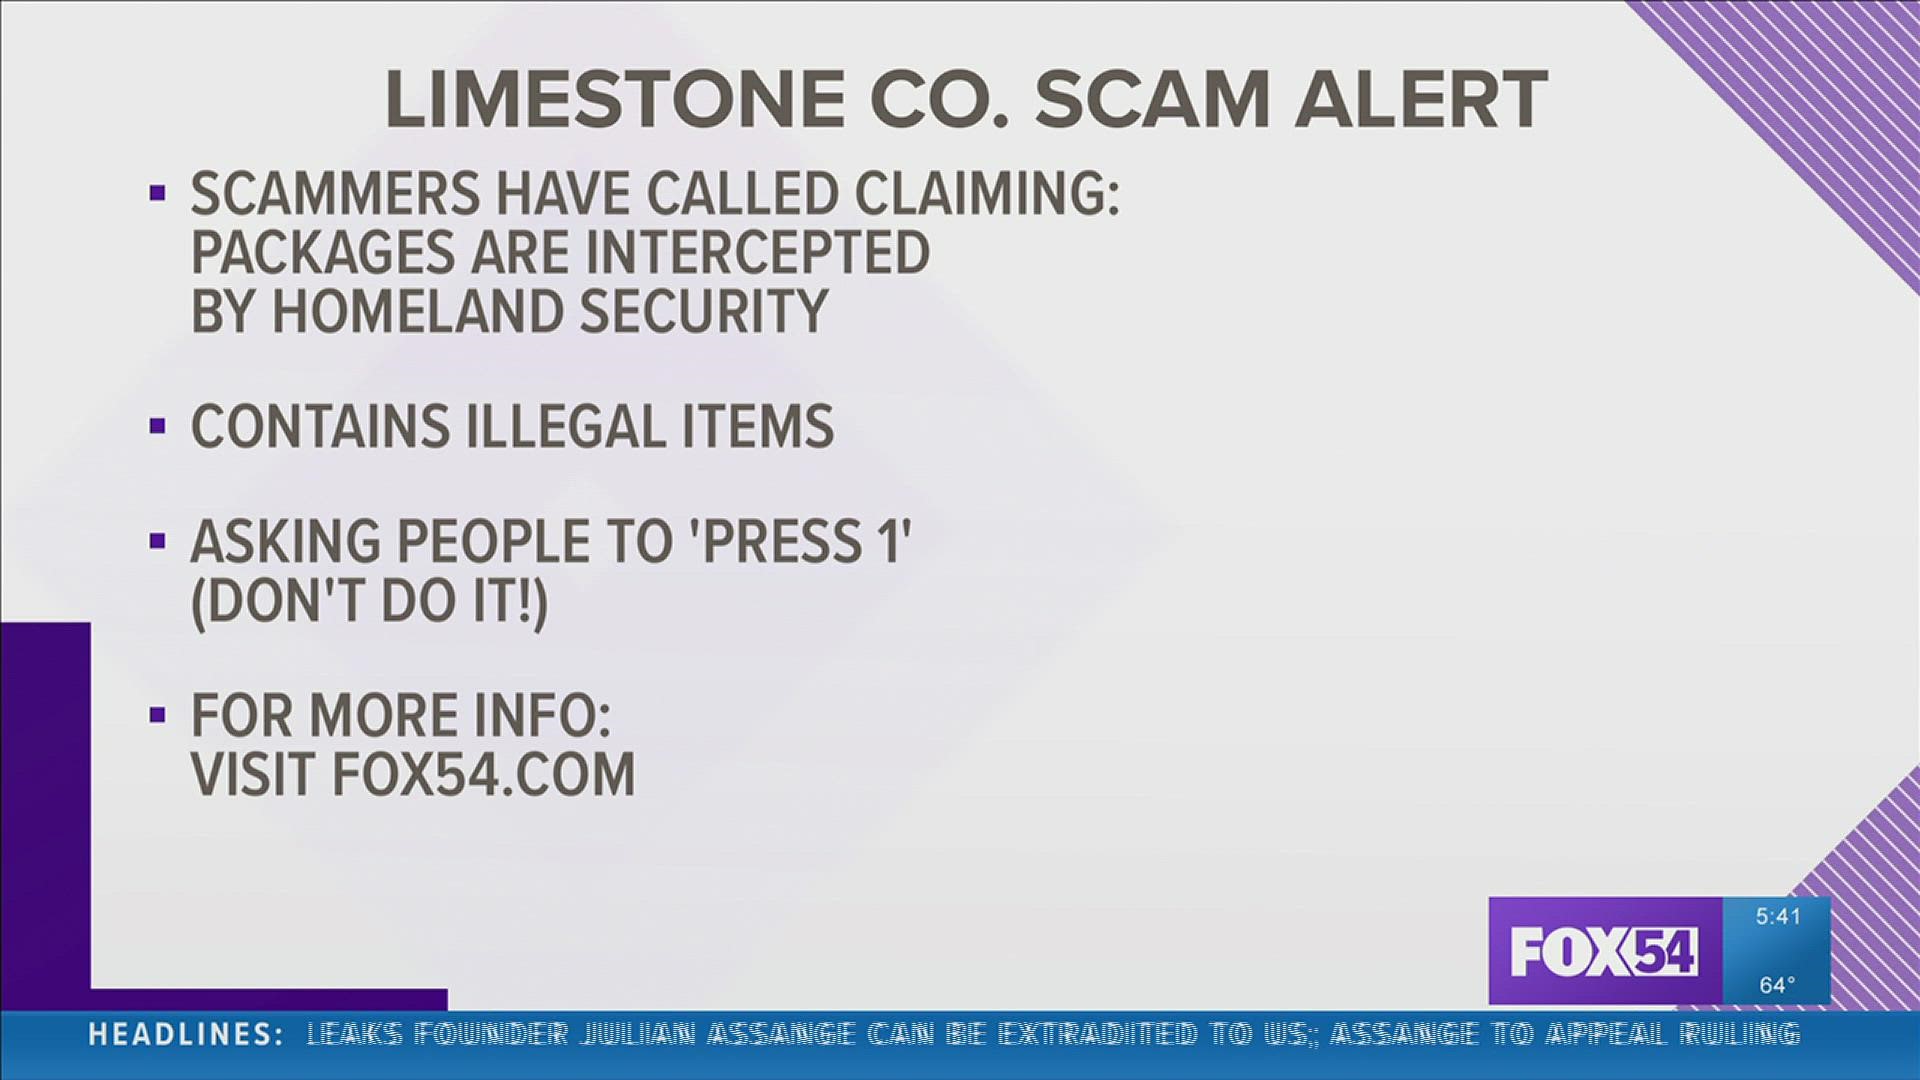 The Limestone County Sheriff's Office is warning people about a new twist on an old scam.